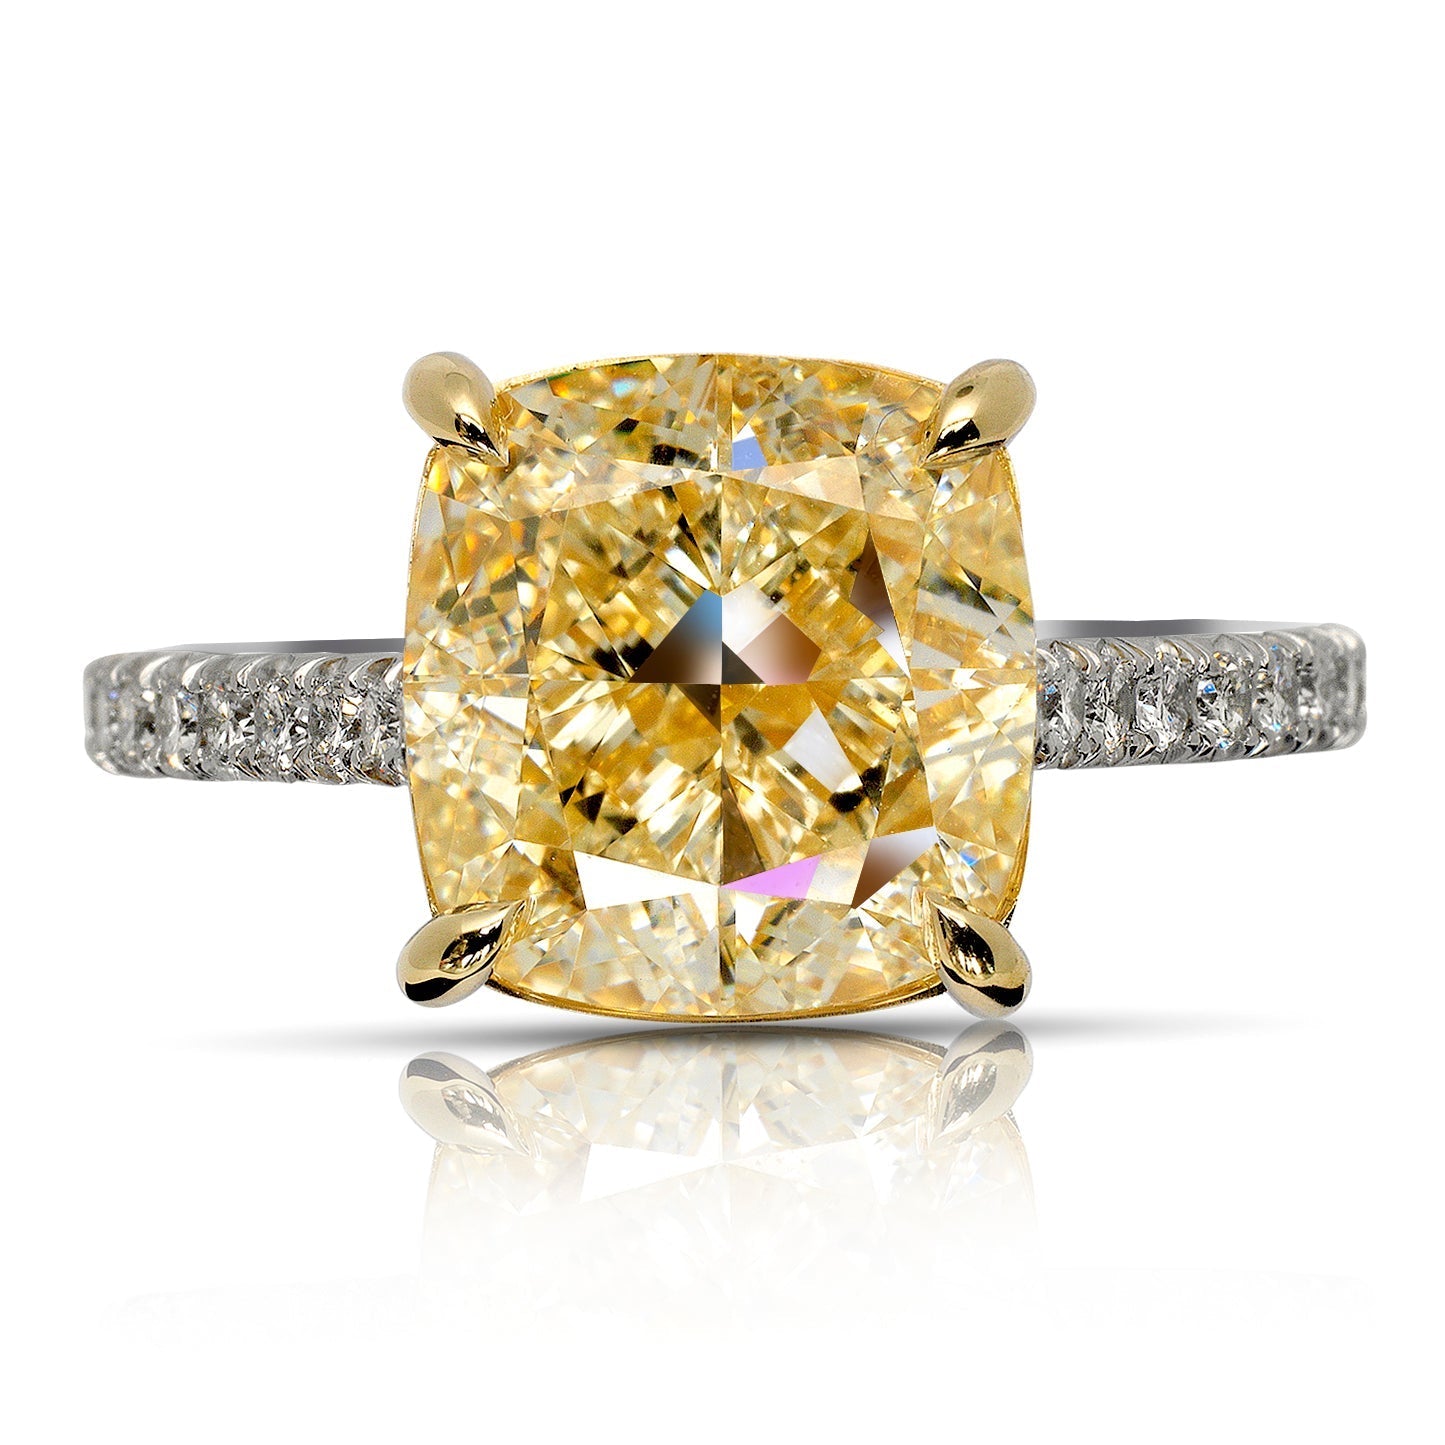 Yellow Diamond Ring Cushion Ring 6 Carat Solitaire Ring in 18k Gold Front View